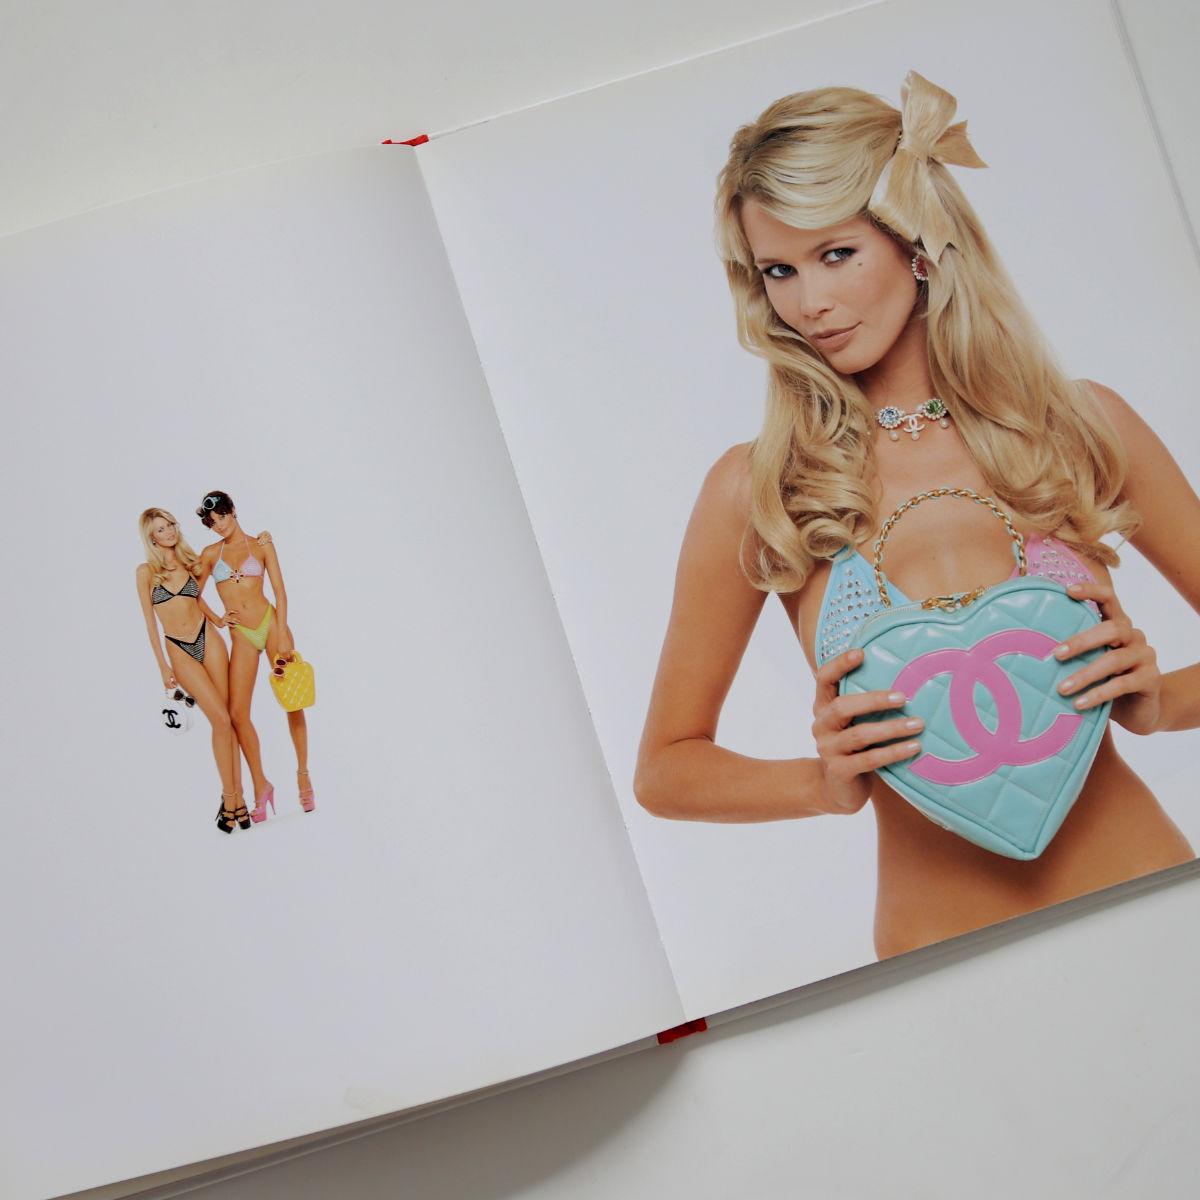 CHANEL 1995 Spring Summer Catalogue

The Barbie Collection. Hardcover. All photography by Karl Lagerfeld featuring iconic fashion with Claudia Schiffer and Helena Christensen. Over 50 pages.

Format: approx. 30 cm x 23.5 cm
A must-have for any